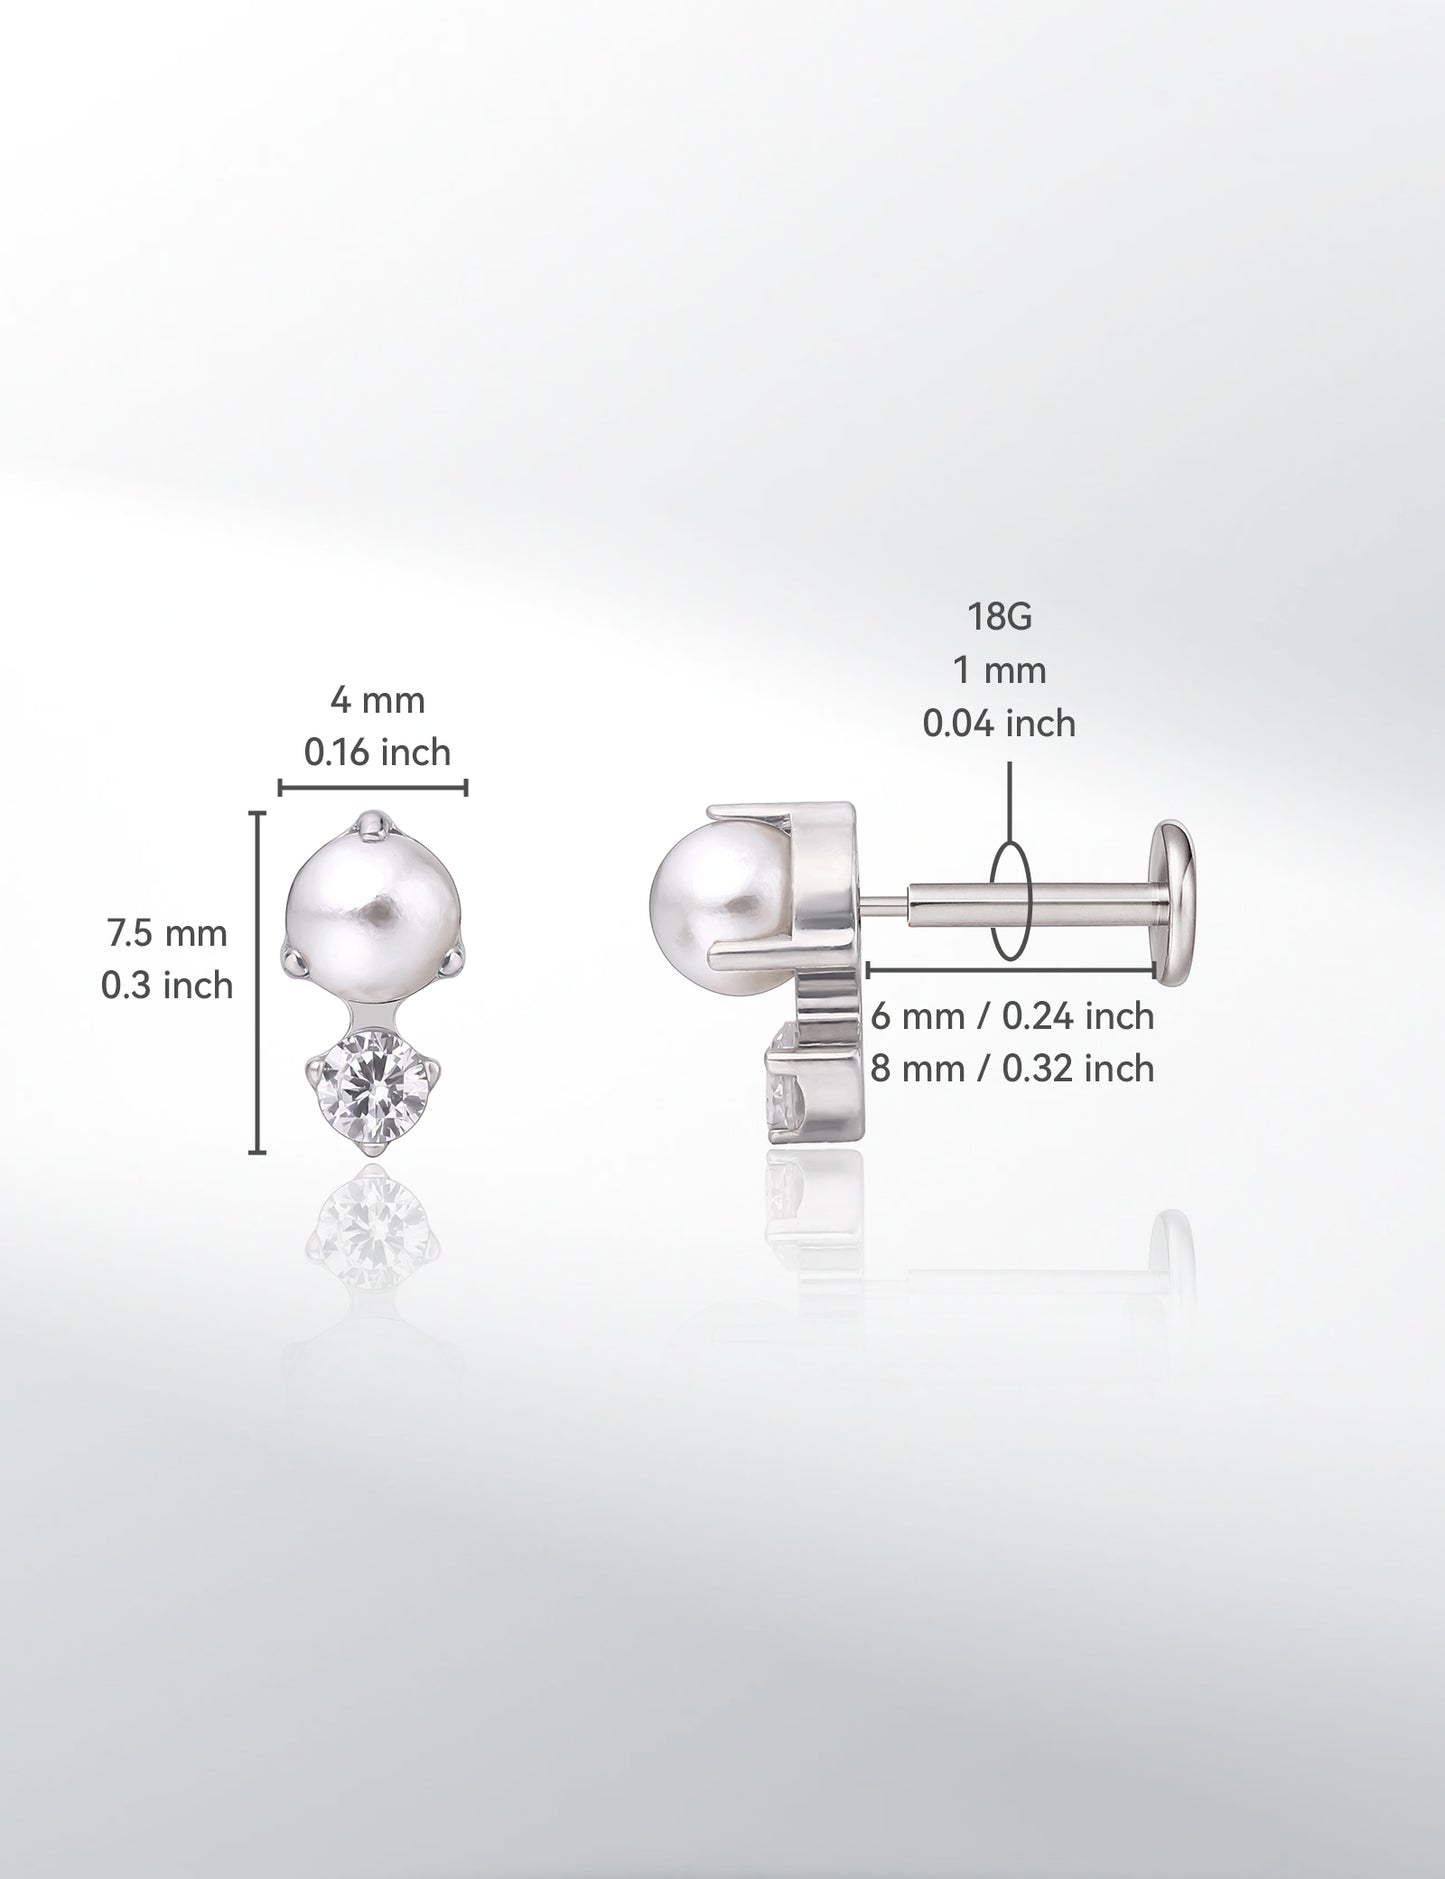 Limerencia G23 Hypoallergenic 18g Flat Back Stud Earrings | F136 Implant Grade Titanium Press Fit Threadless Push Pop in Cartilage Helix Labret Lip Monroe Tragus Piercing Studs- CZ + Pearl